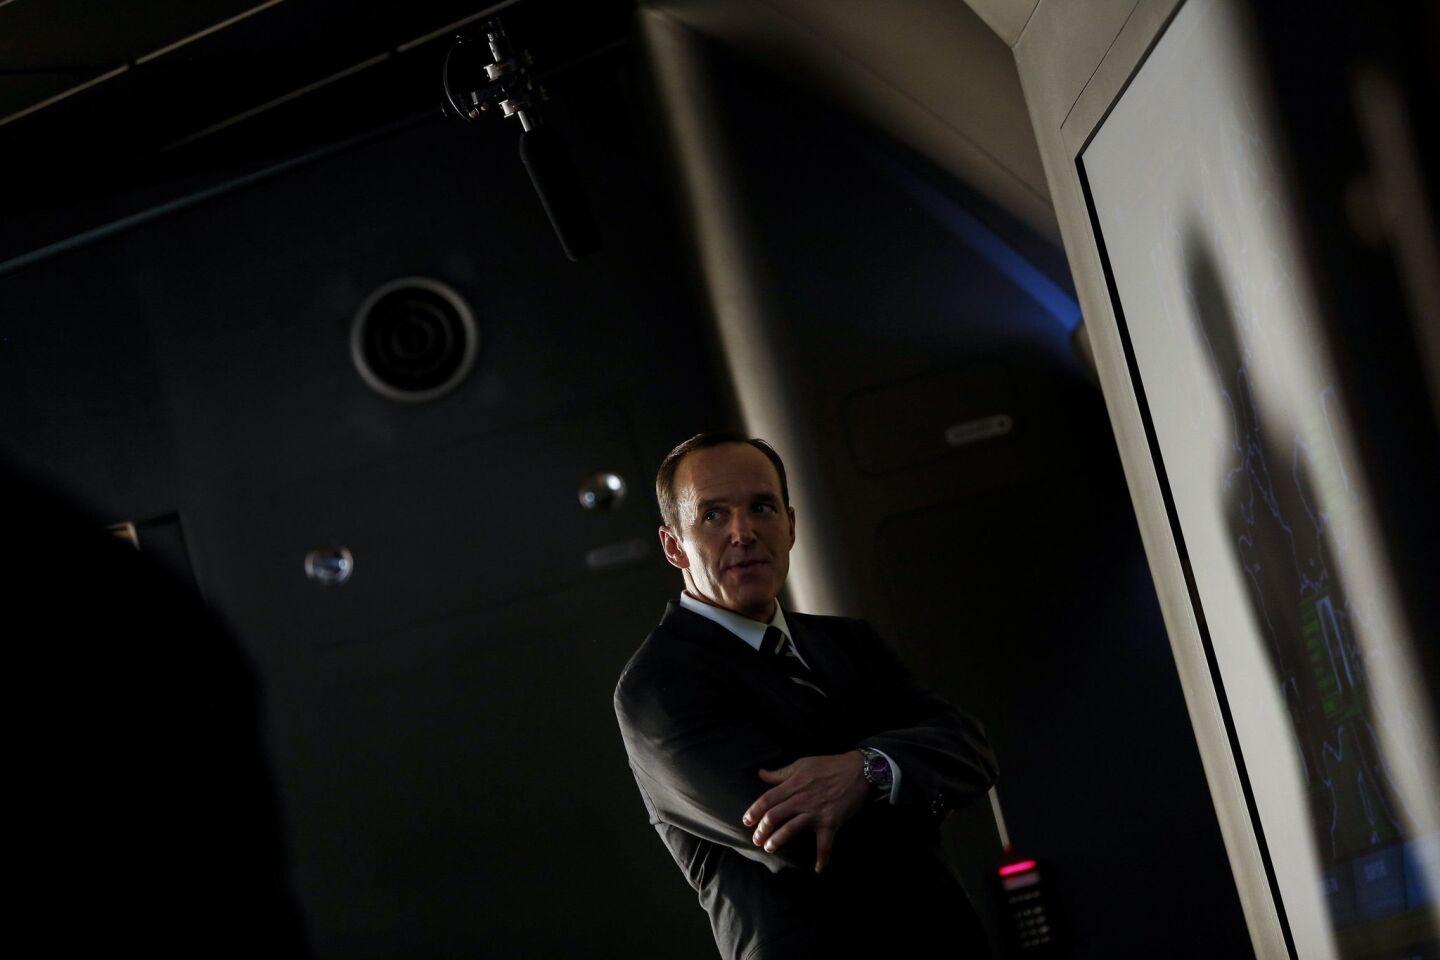 On the set: 'Agents of S.H.I.E.L.D.'